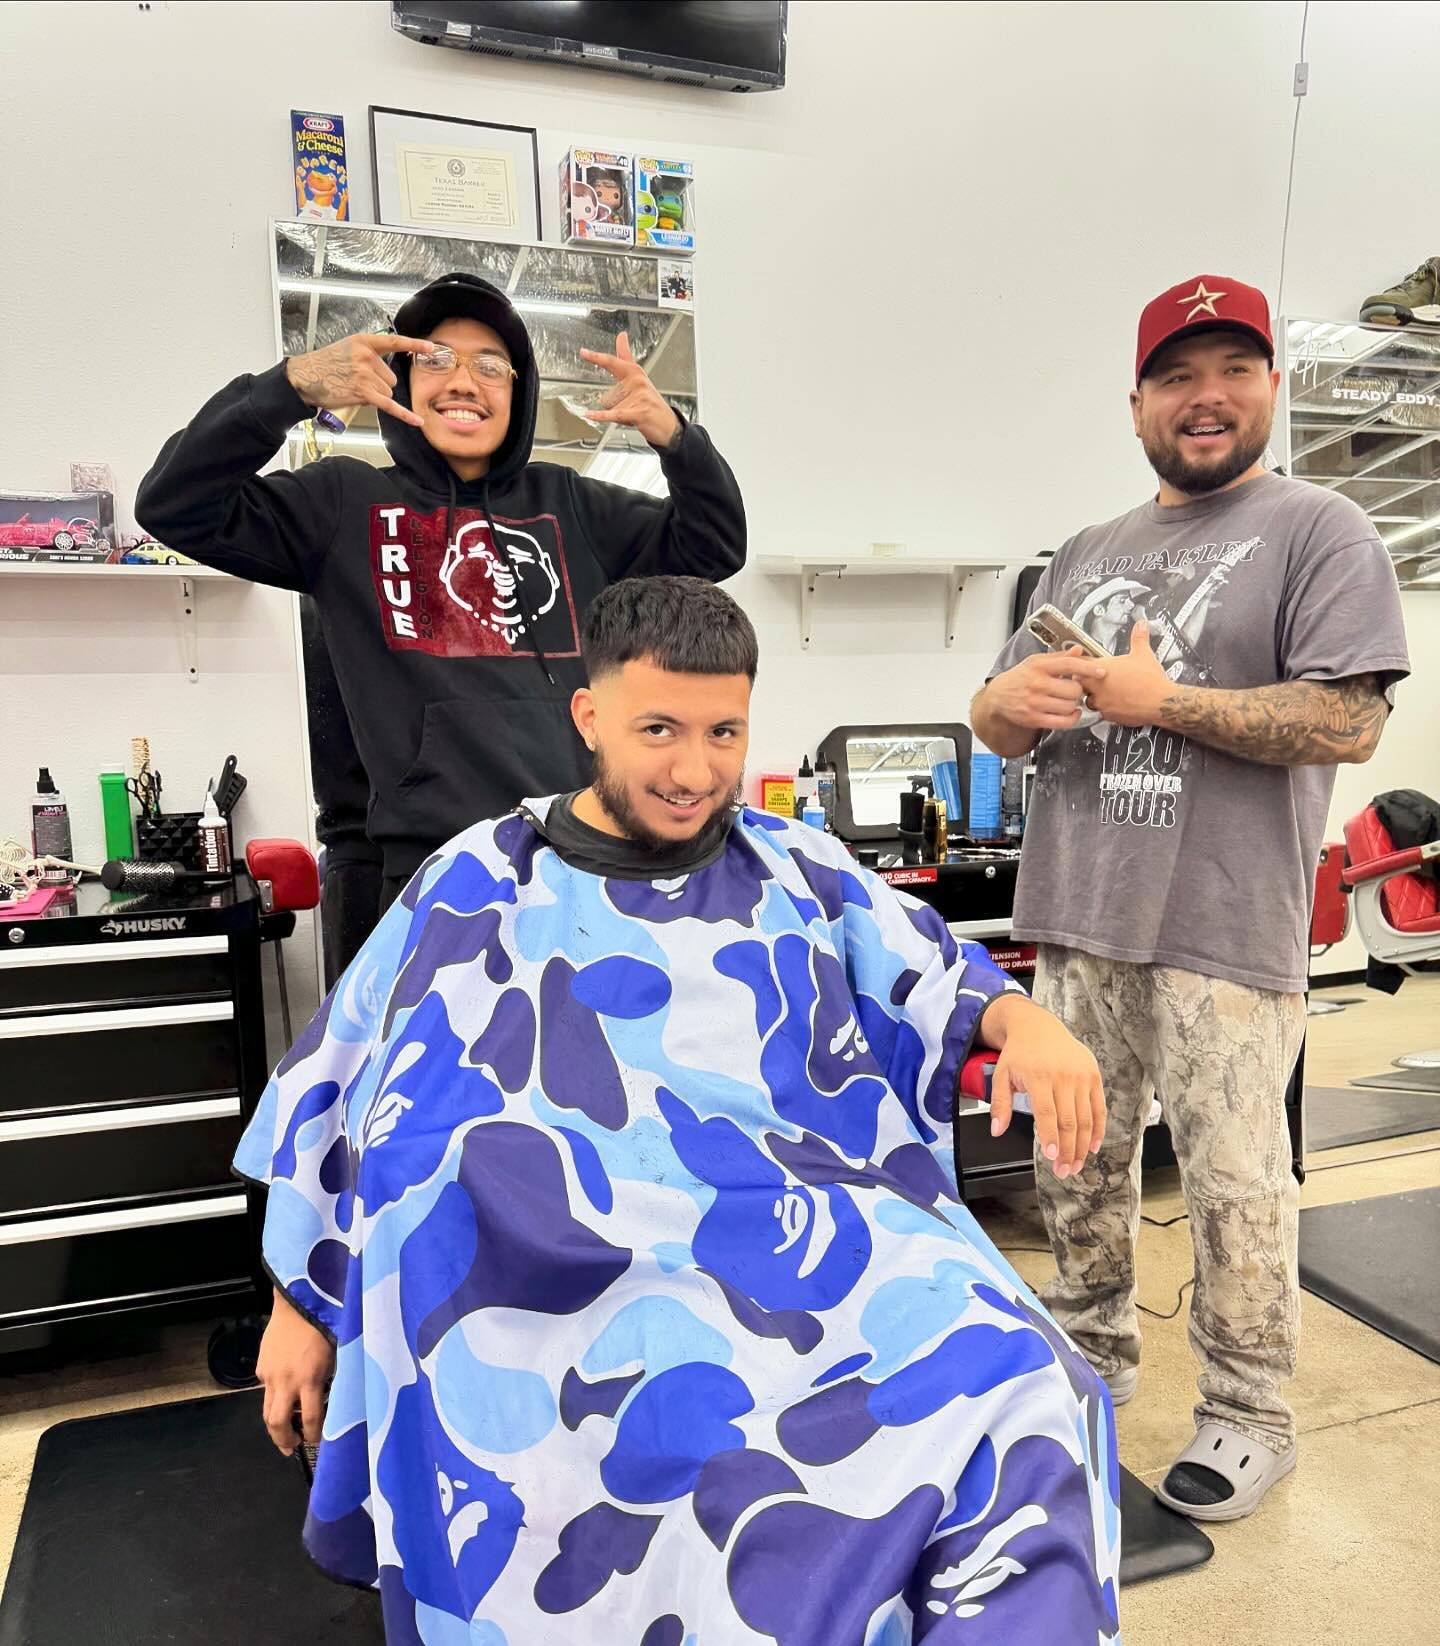 First Time at Change? Get 25% off Your Haircut - On Us! 

📍 @changebarberstudio | Pearland, TX